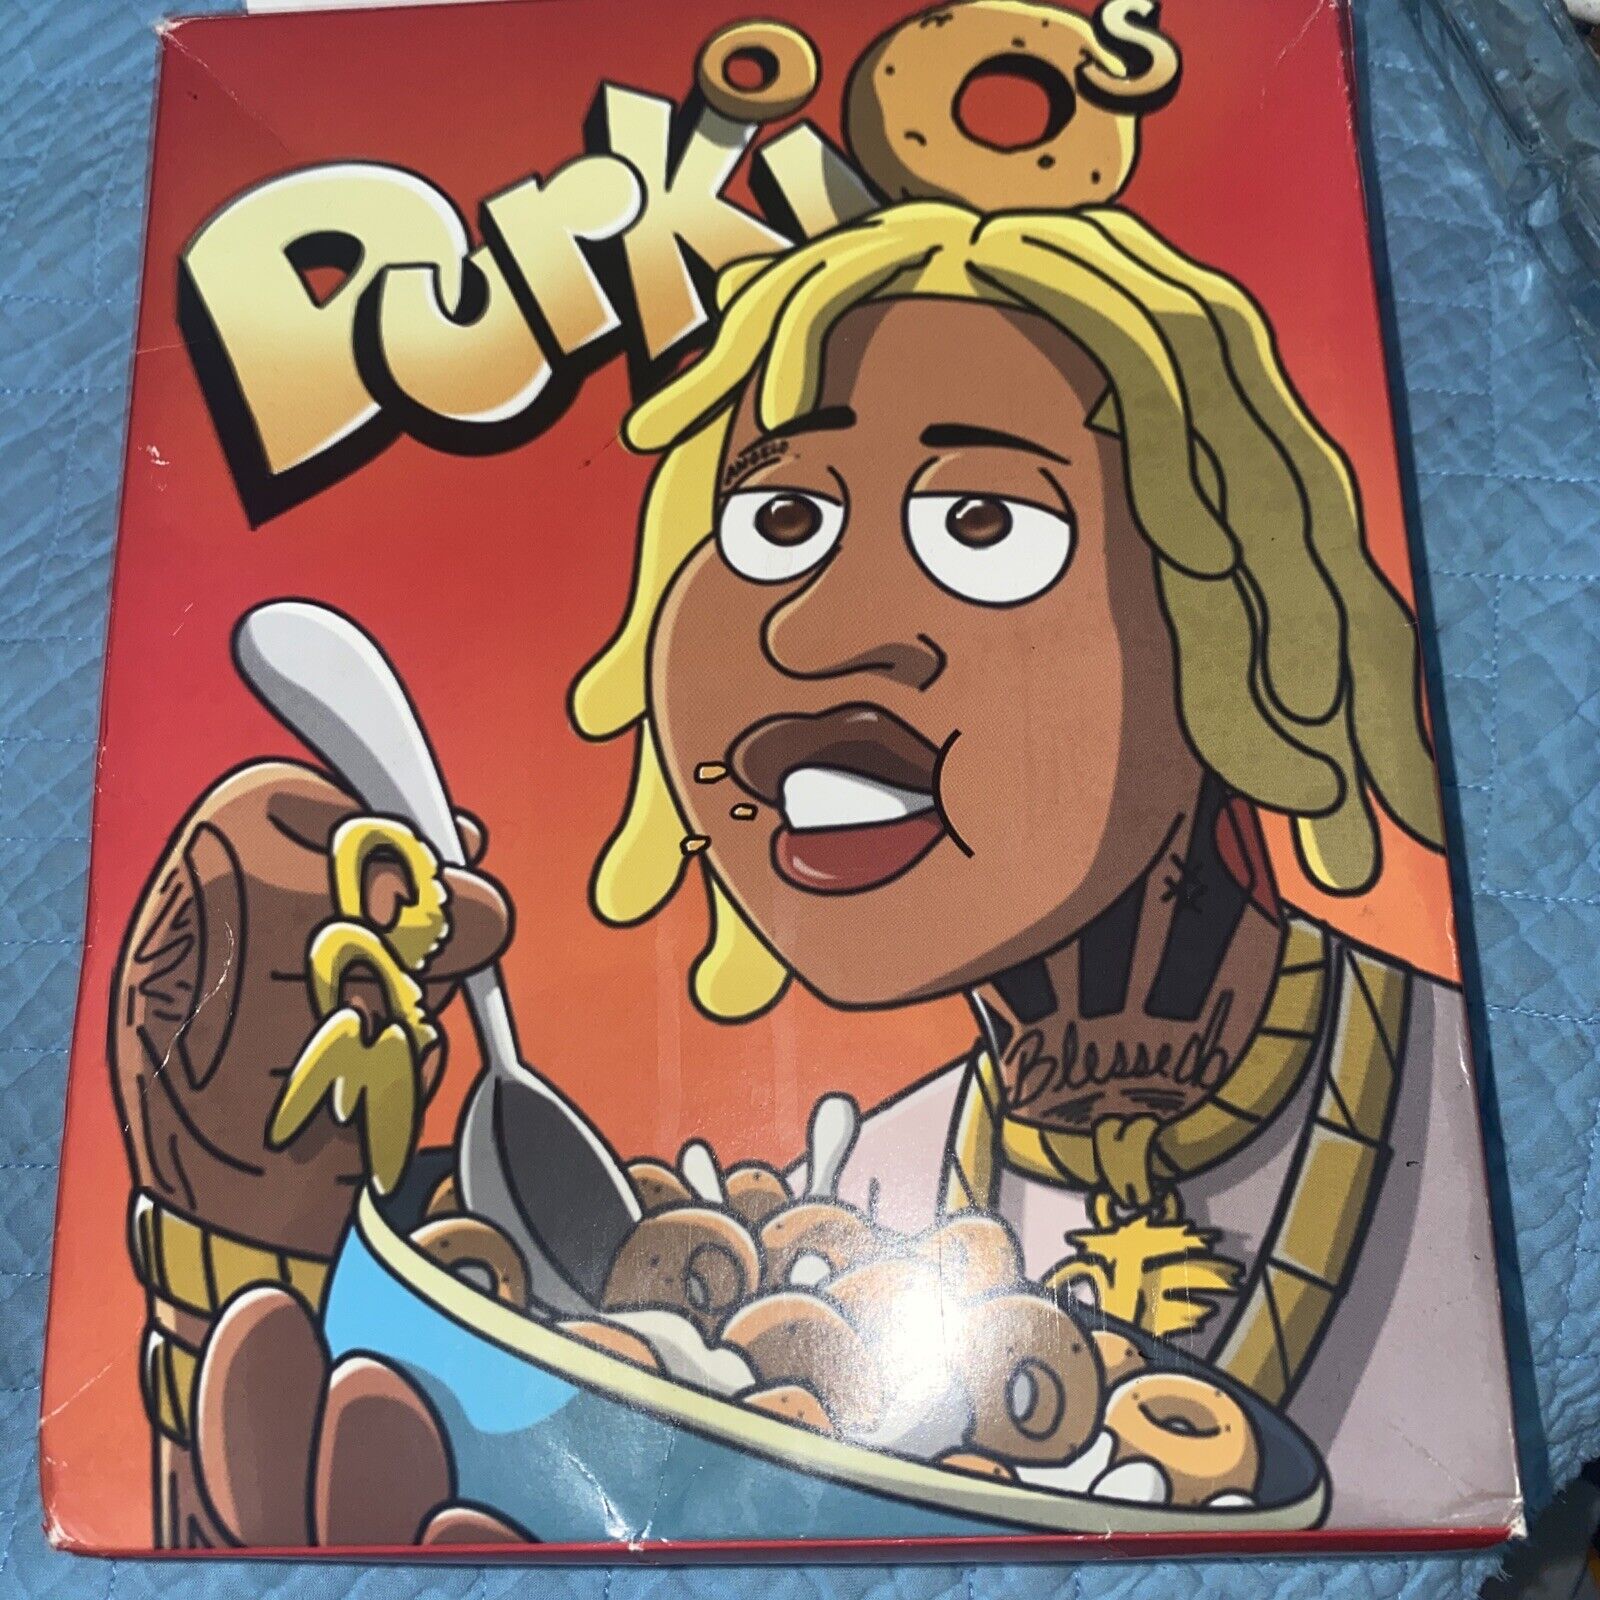 lil durk cereal “durkios” Opened box a must for durk fans.